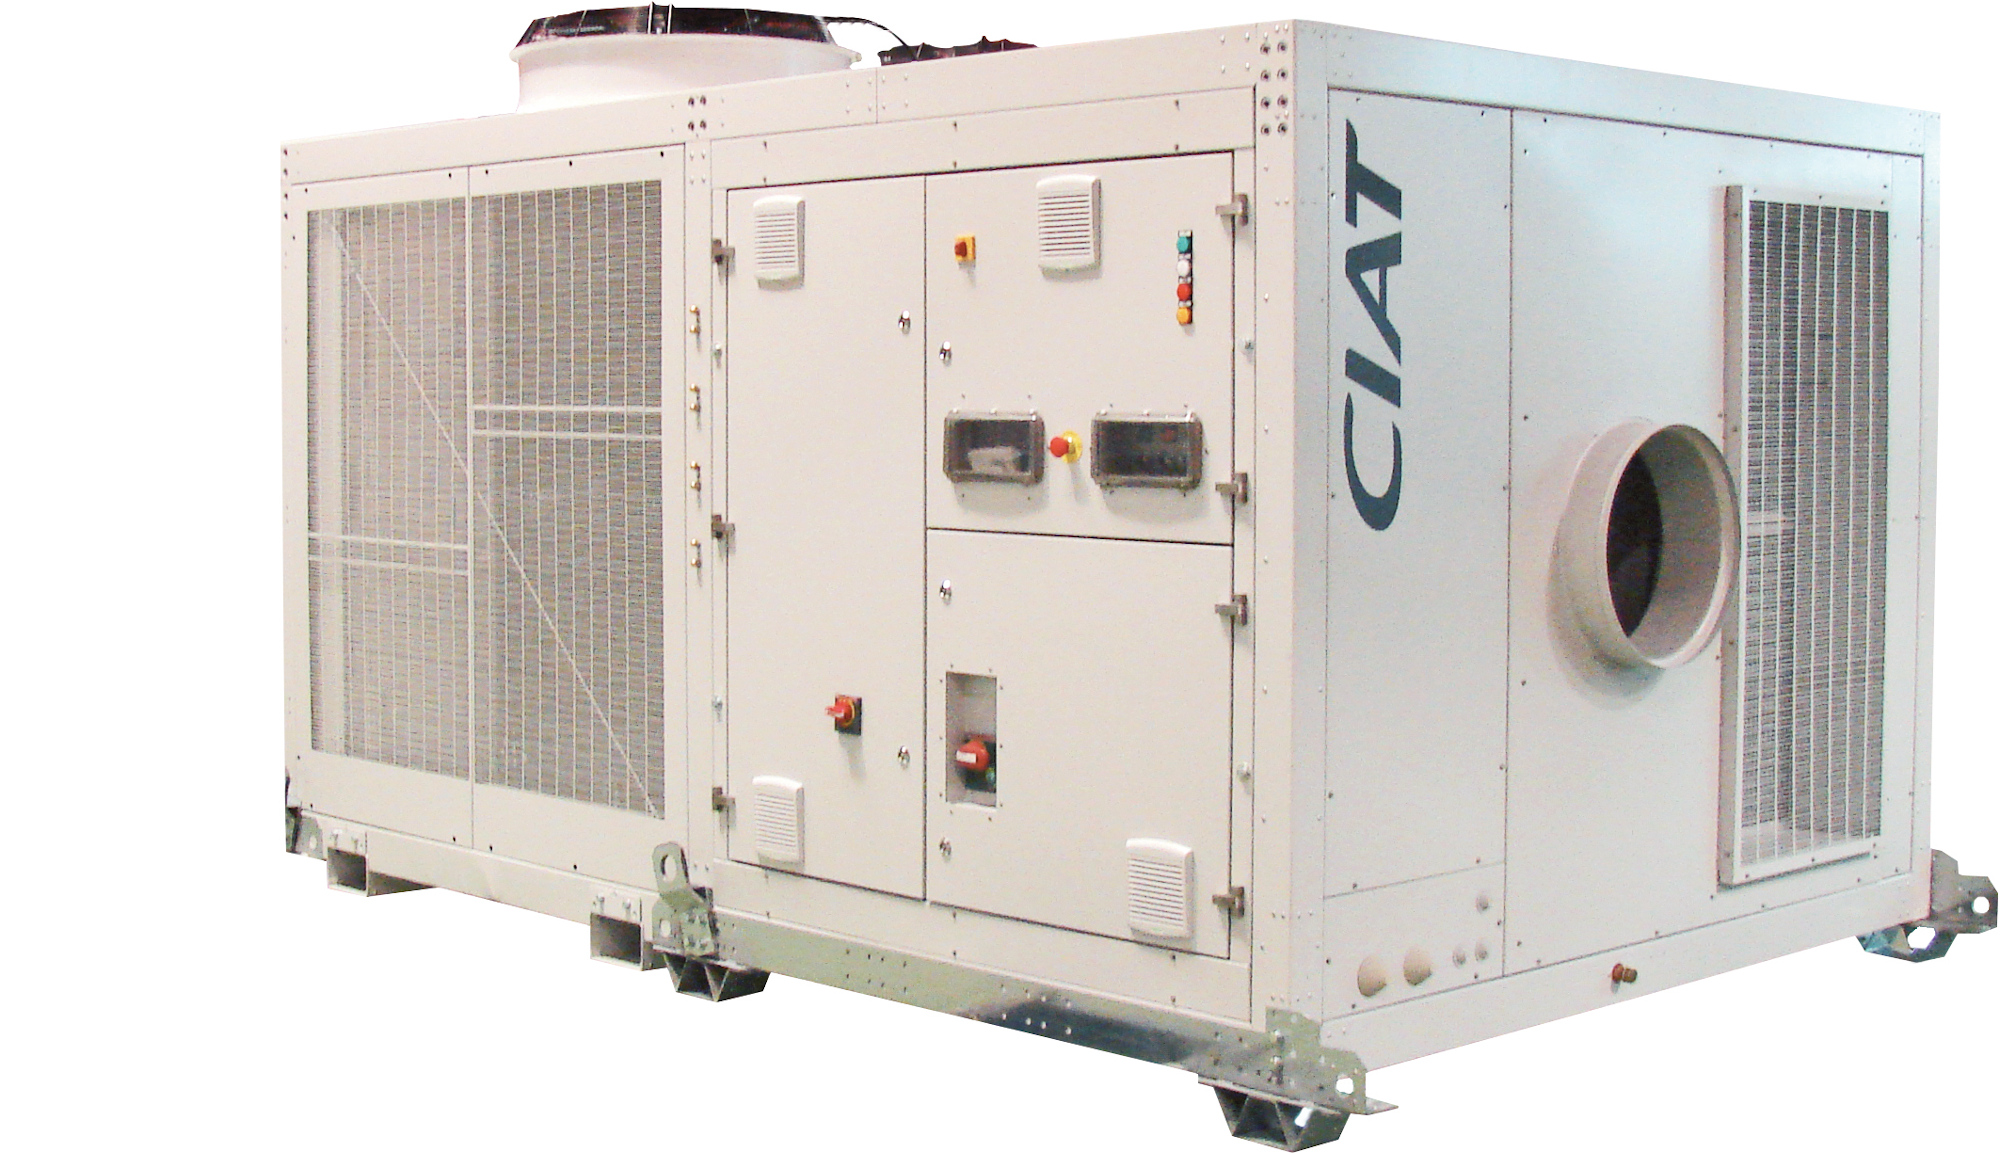 Air Conditioning Equipment - CIAT - PCA Units - Air-Conditioning Products